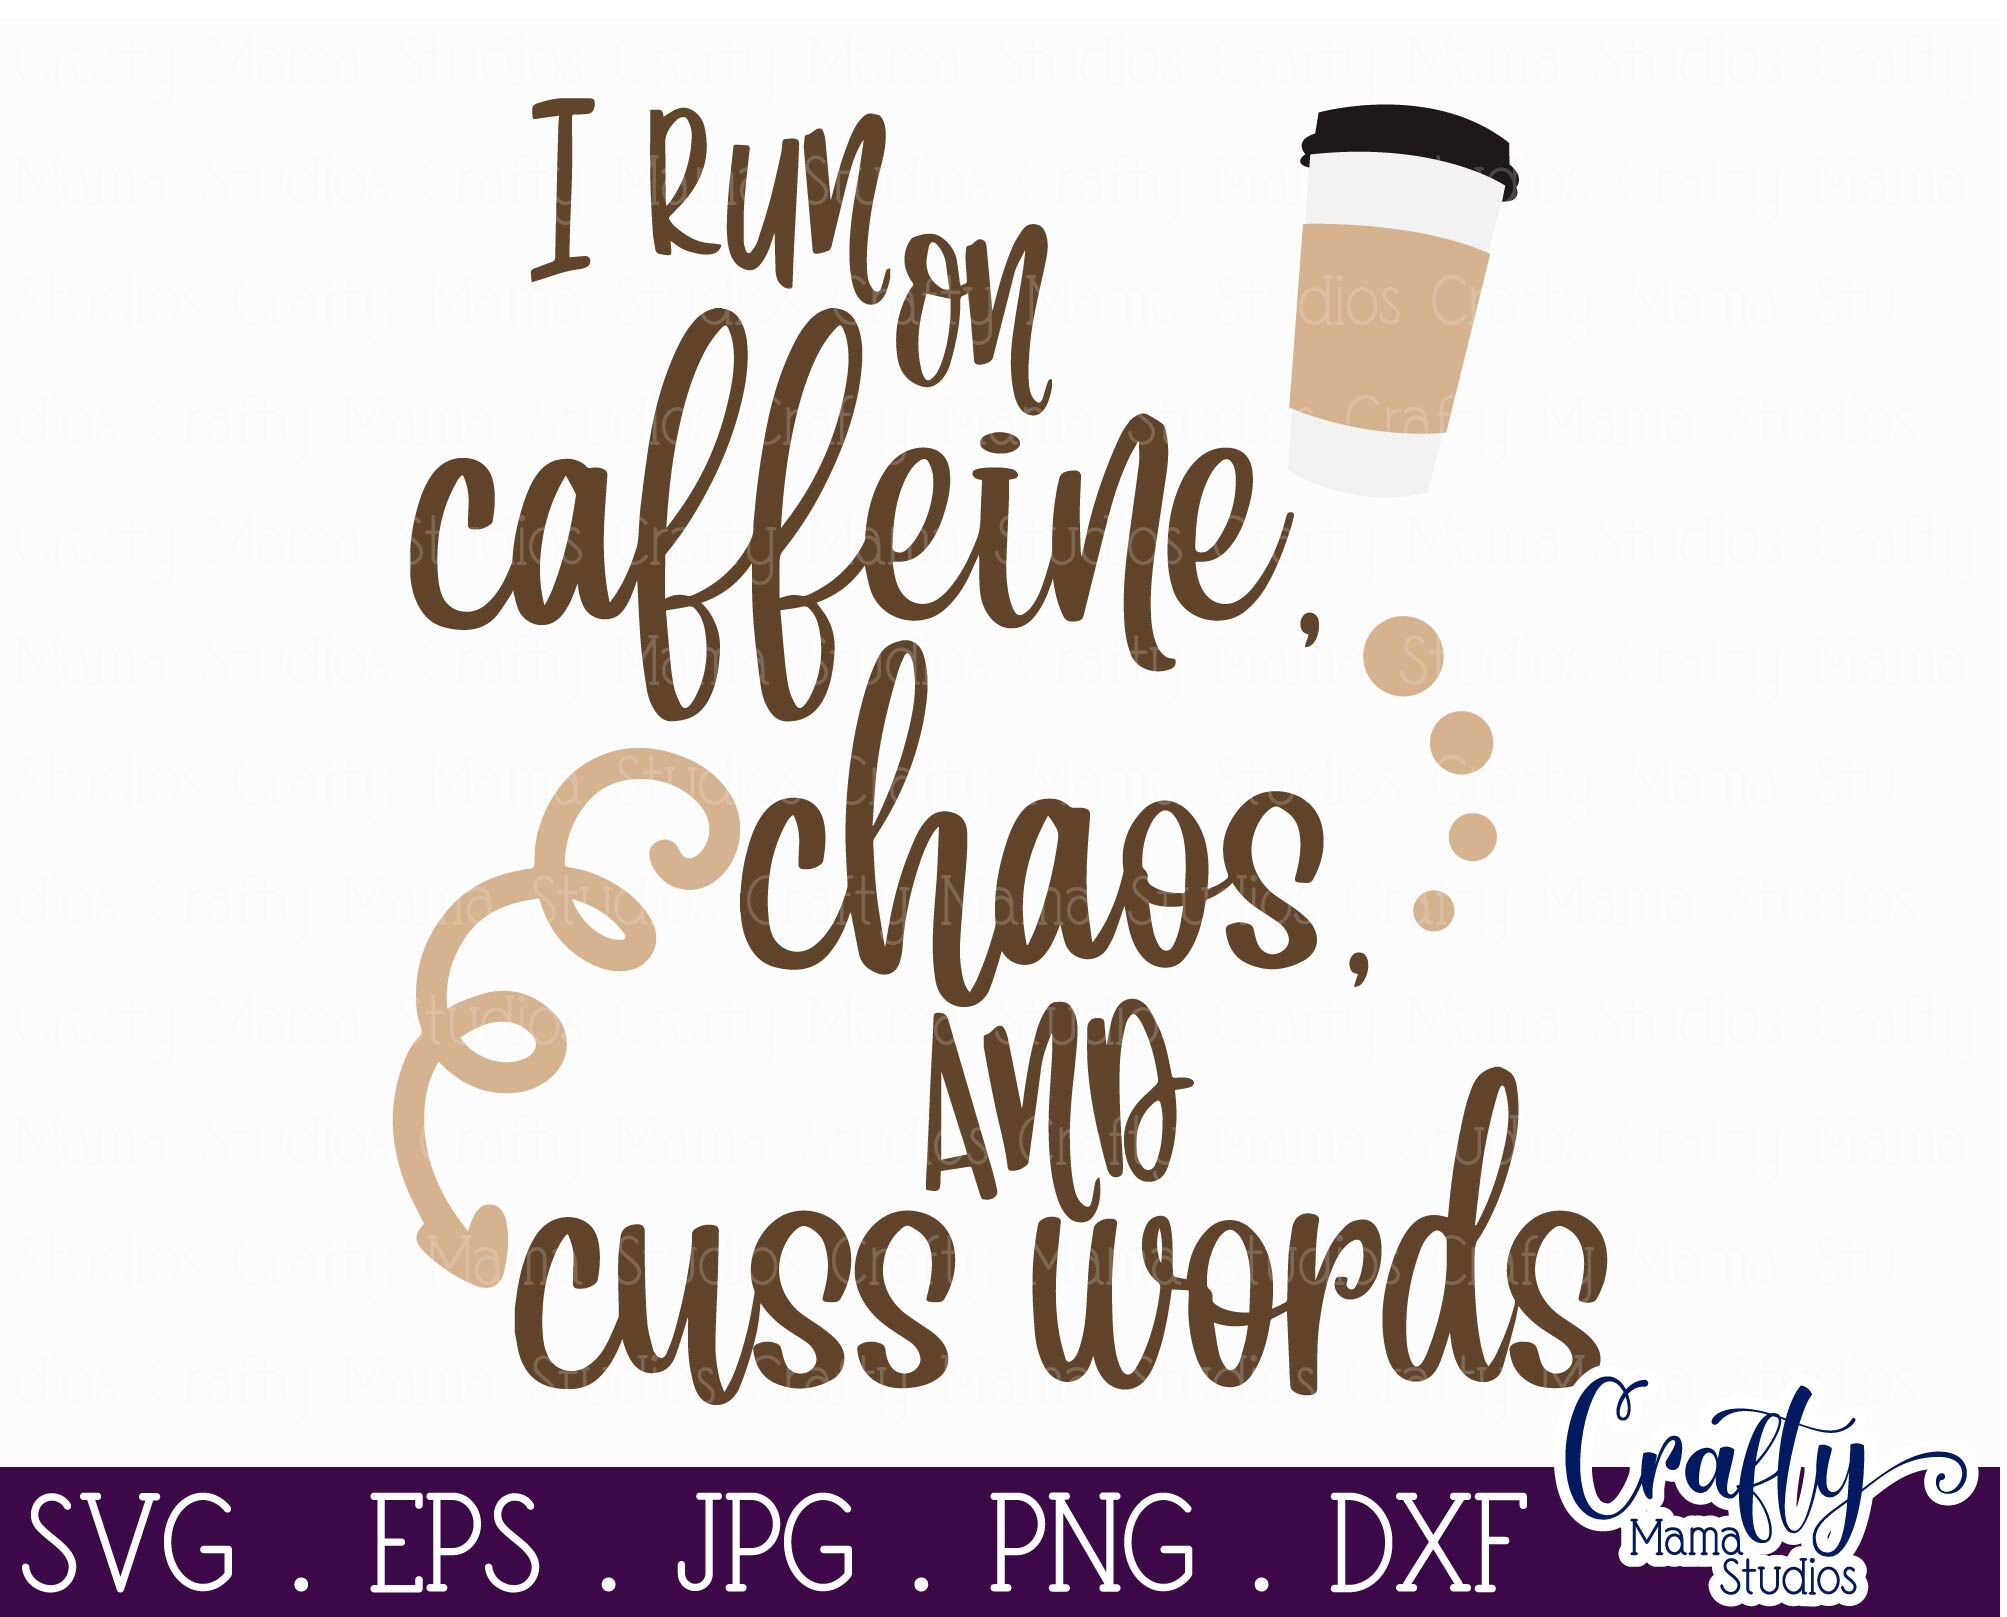 Download Clip Art Coffee Svg Bundle I Run On Caffeine Chaos And Cuss Words Svg Cut File Sarcastic Coffee Quote Svg Cricut Coffee Mug Svg Love Coffee Svg Art Collectibles